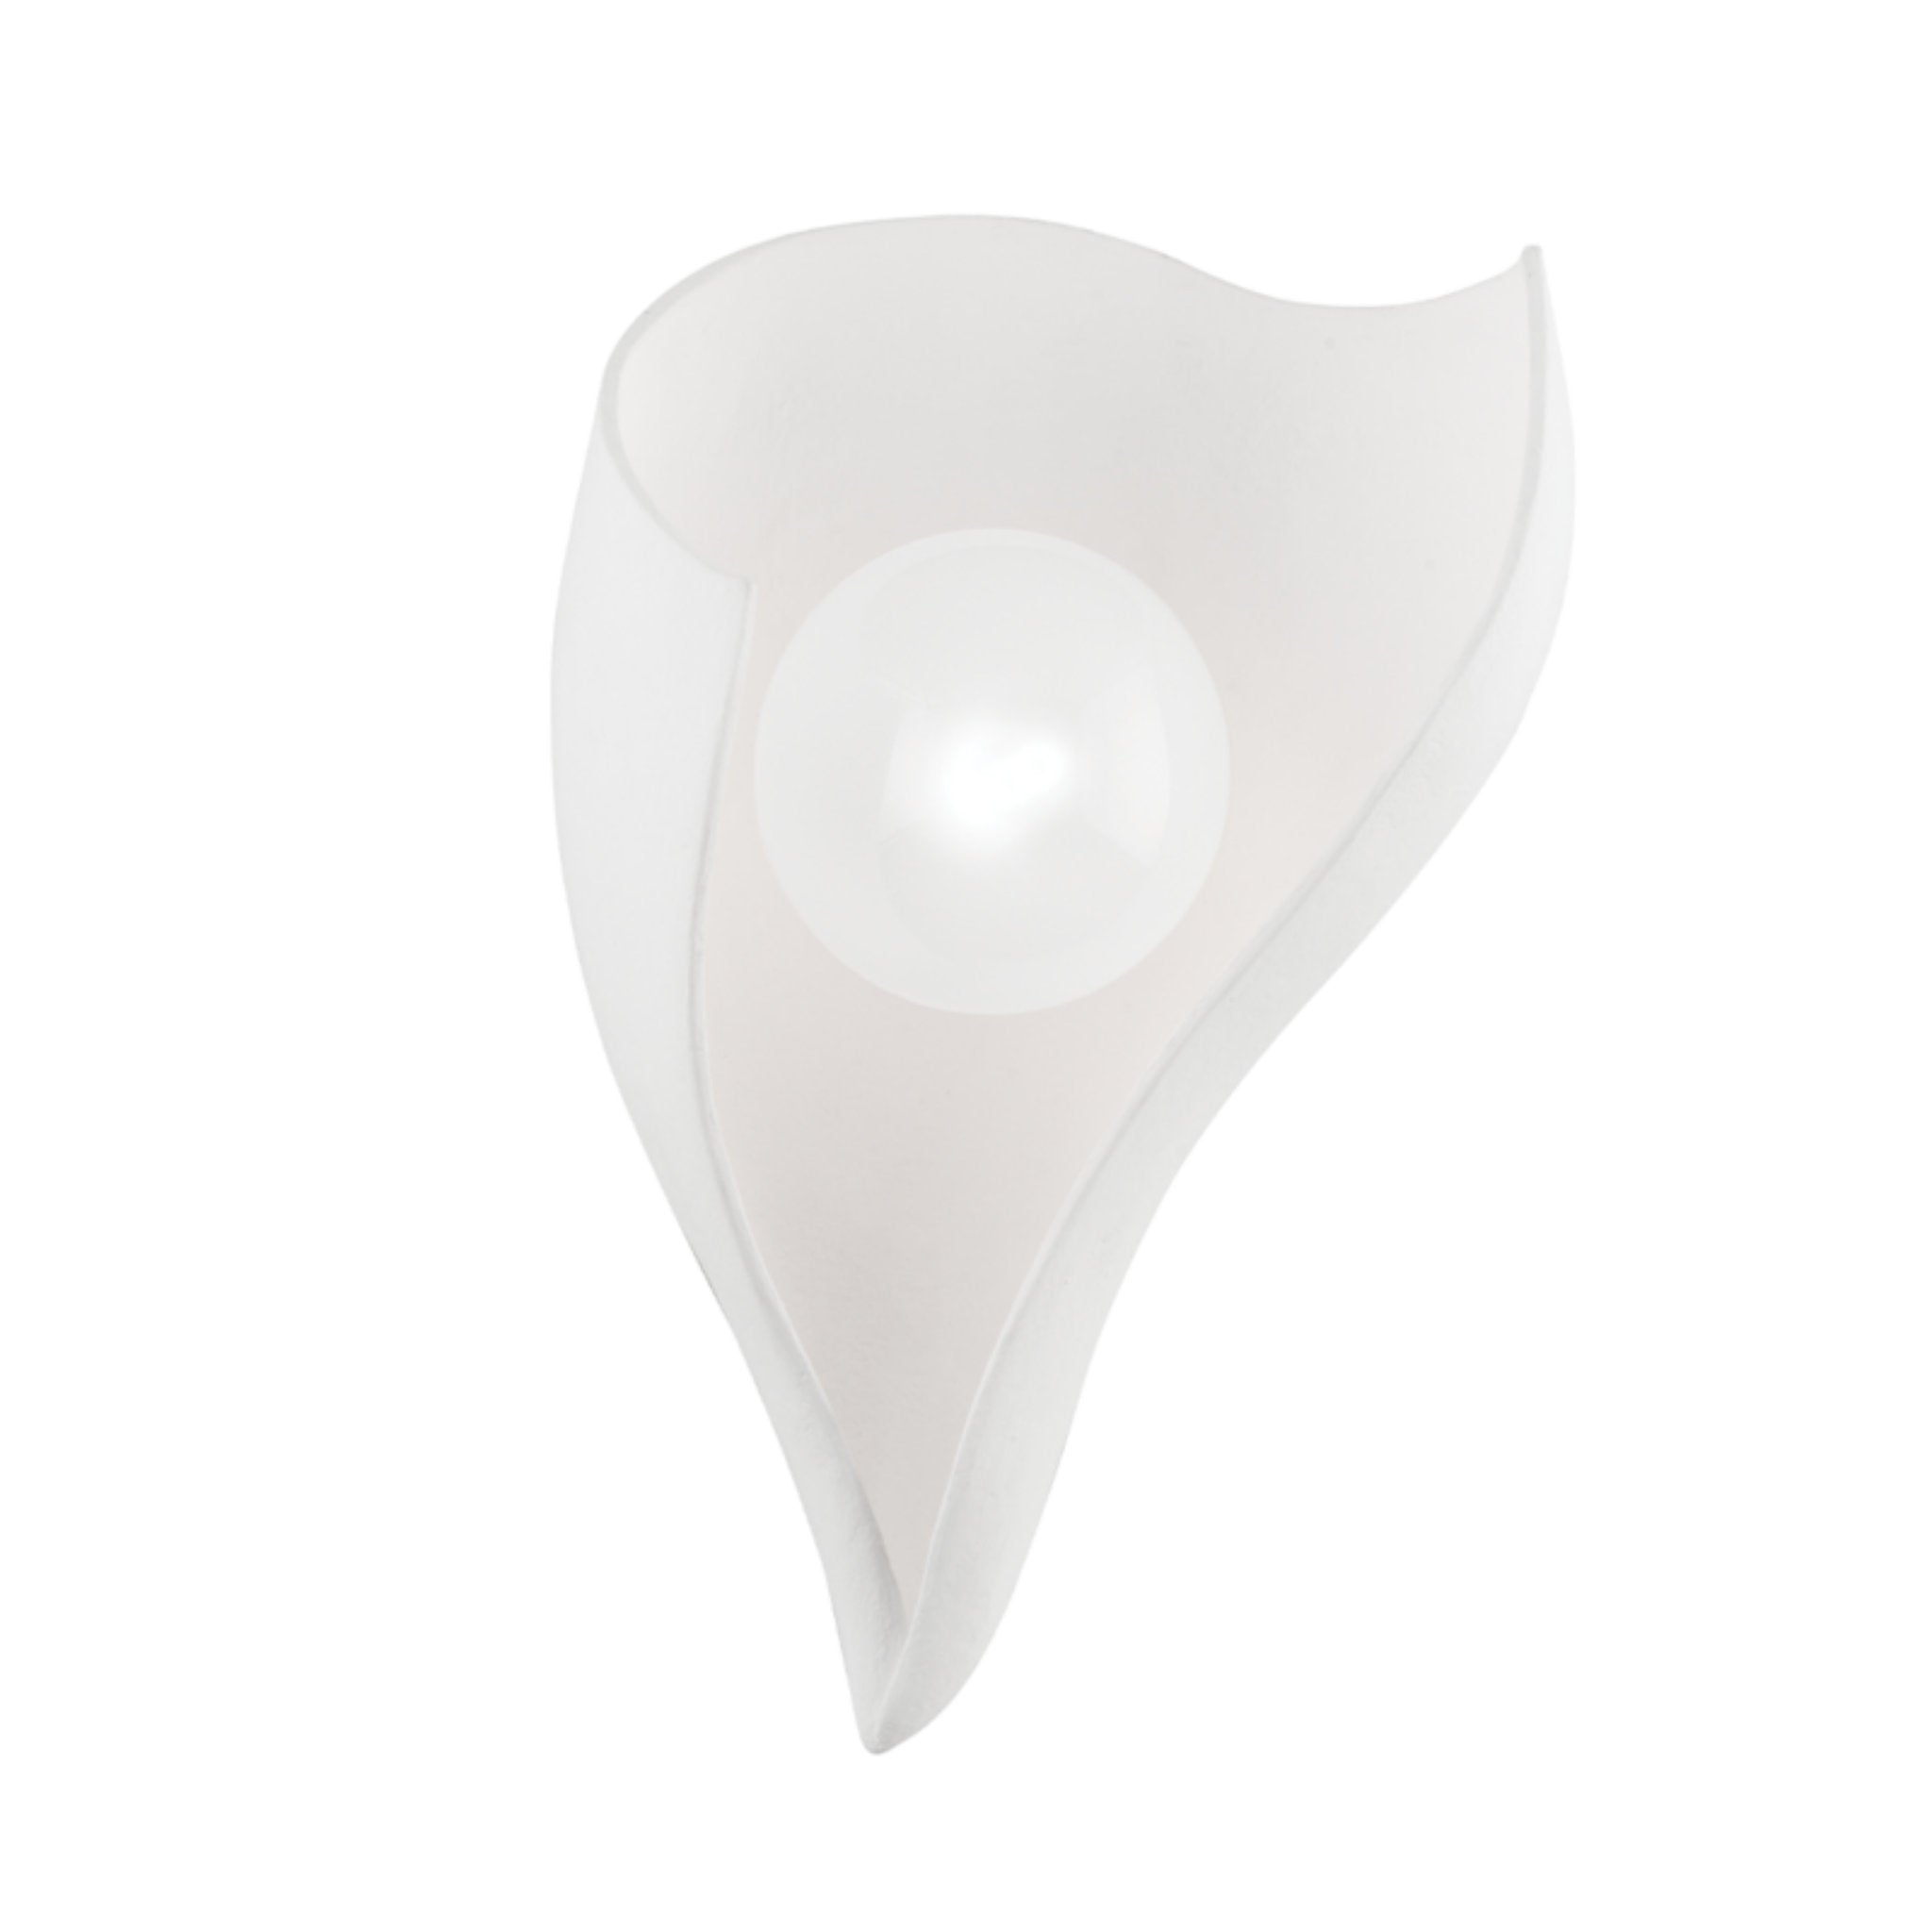 Moonstone 1 Light Wall Sconce in Gesso White